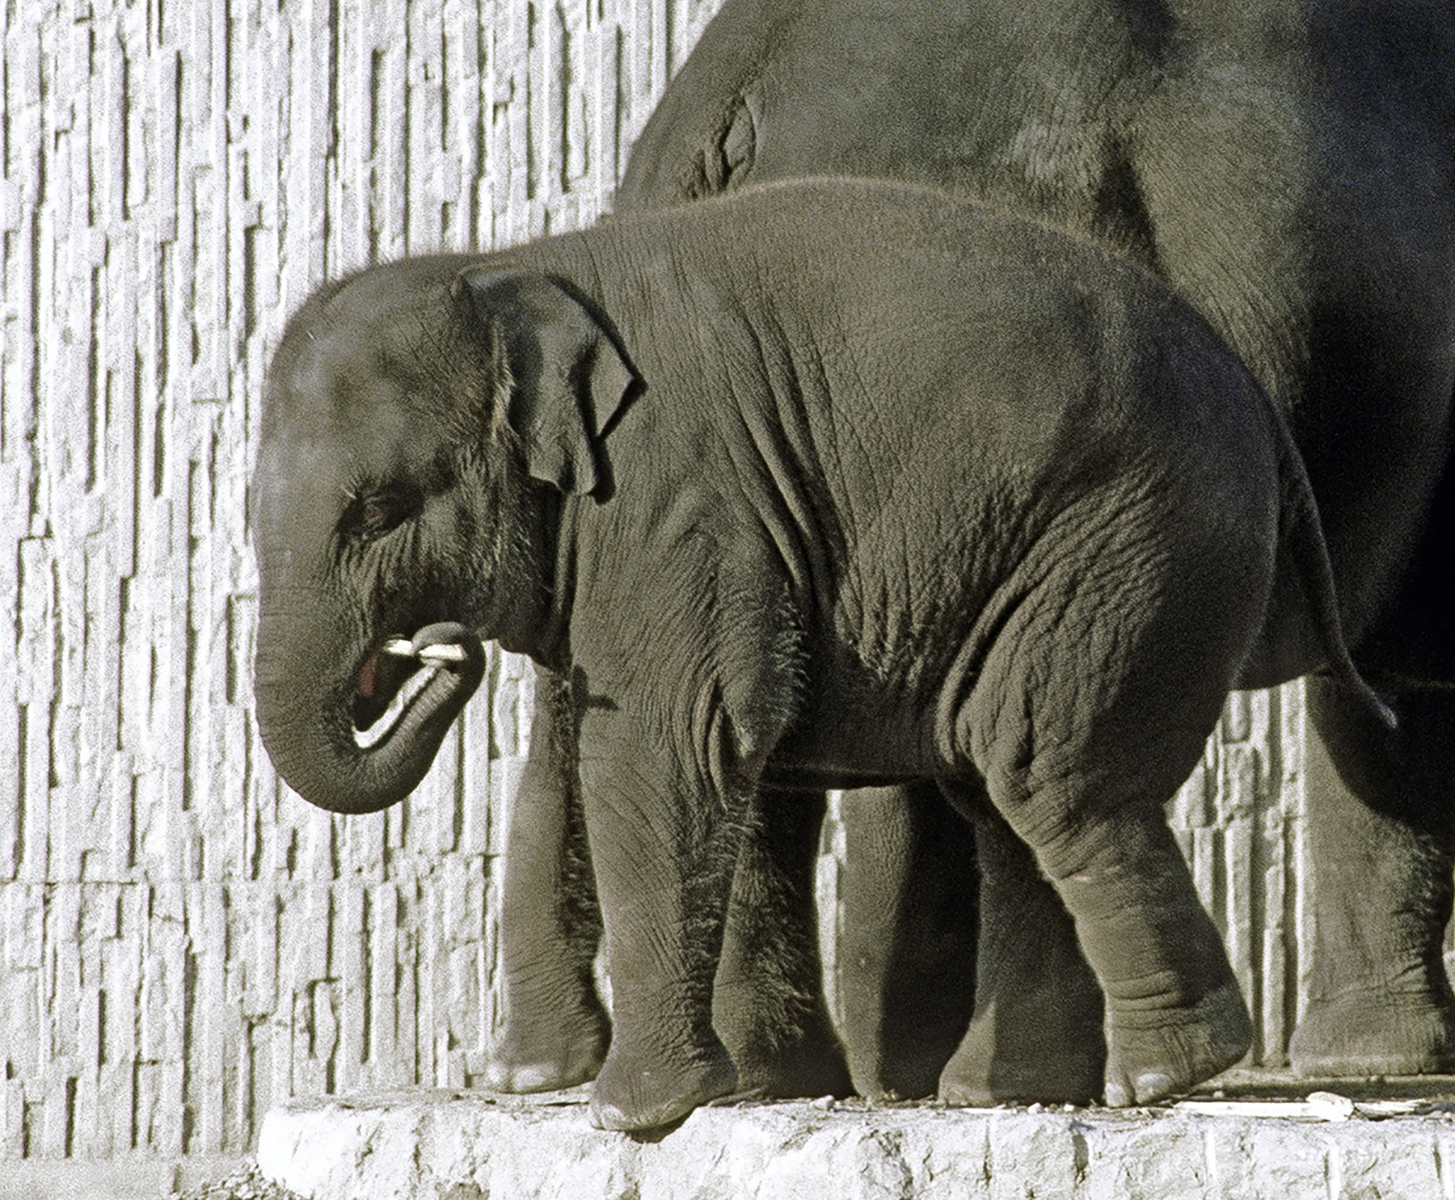 Elephant calf Komali, with mother Ceyla-Himali in the background (image: Zoo Zurich Archive)